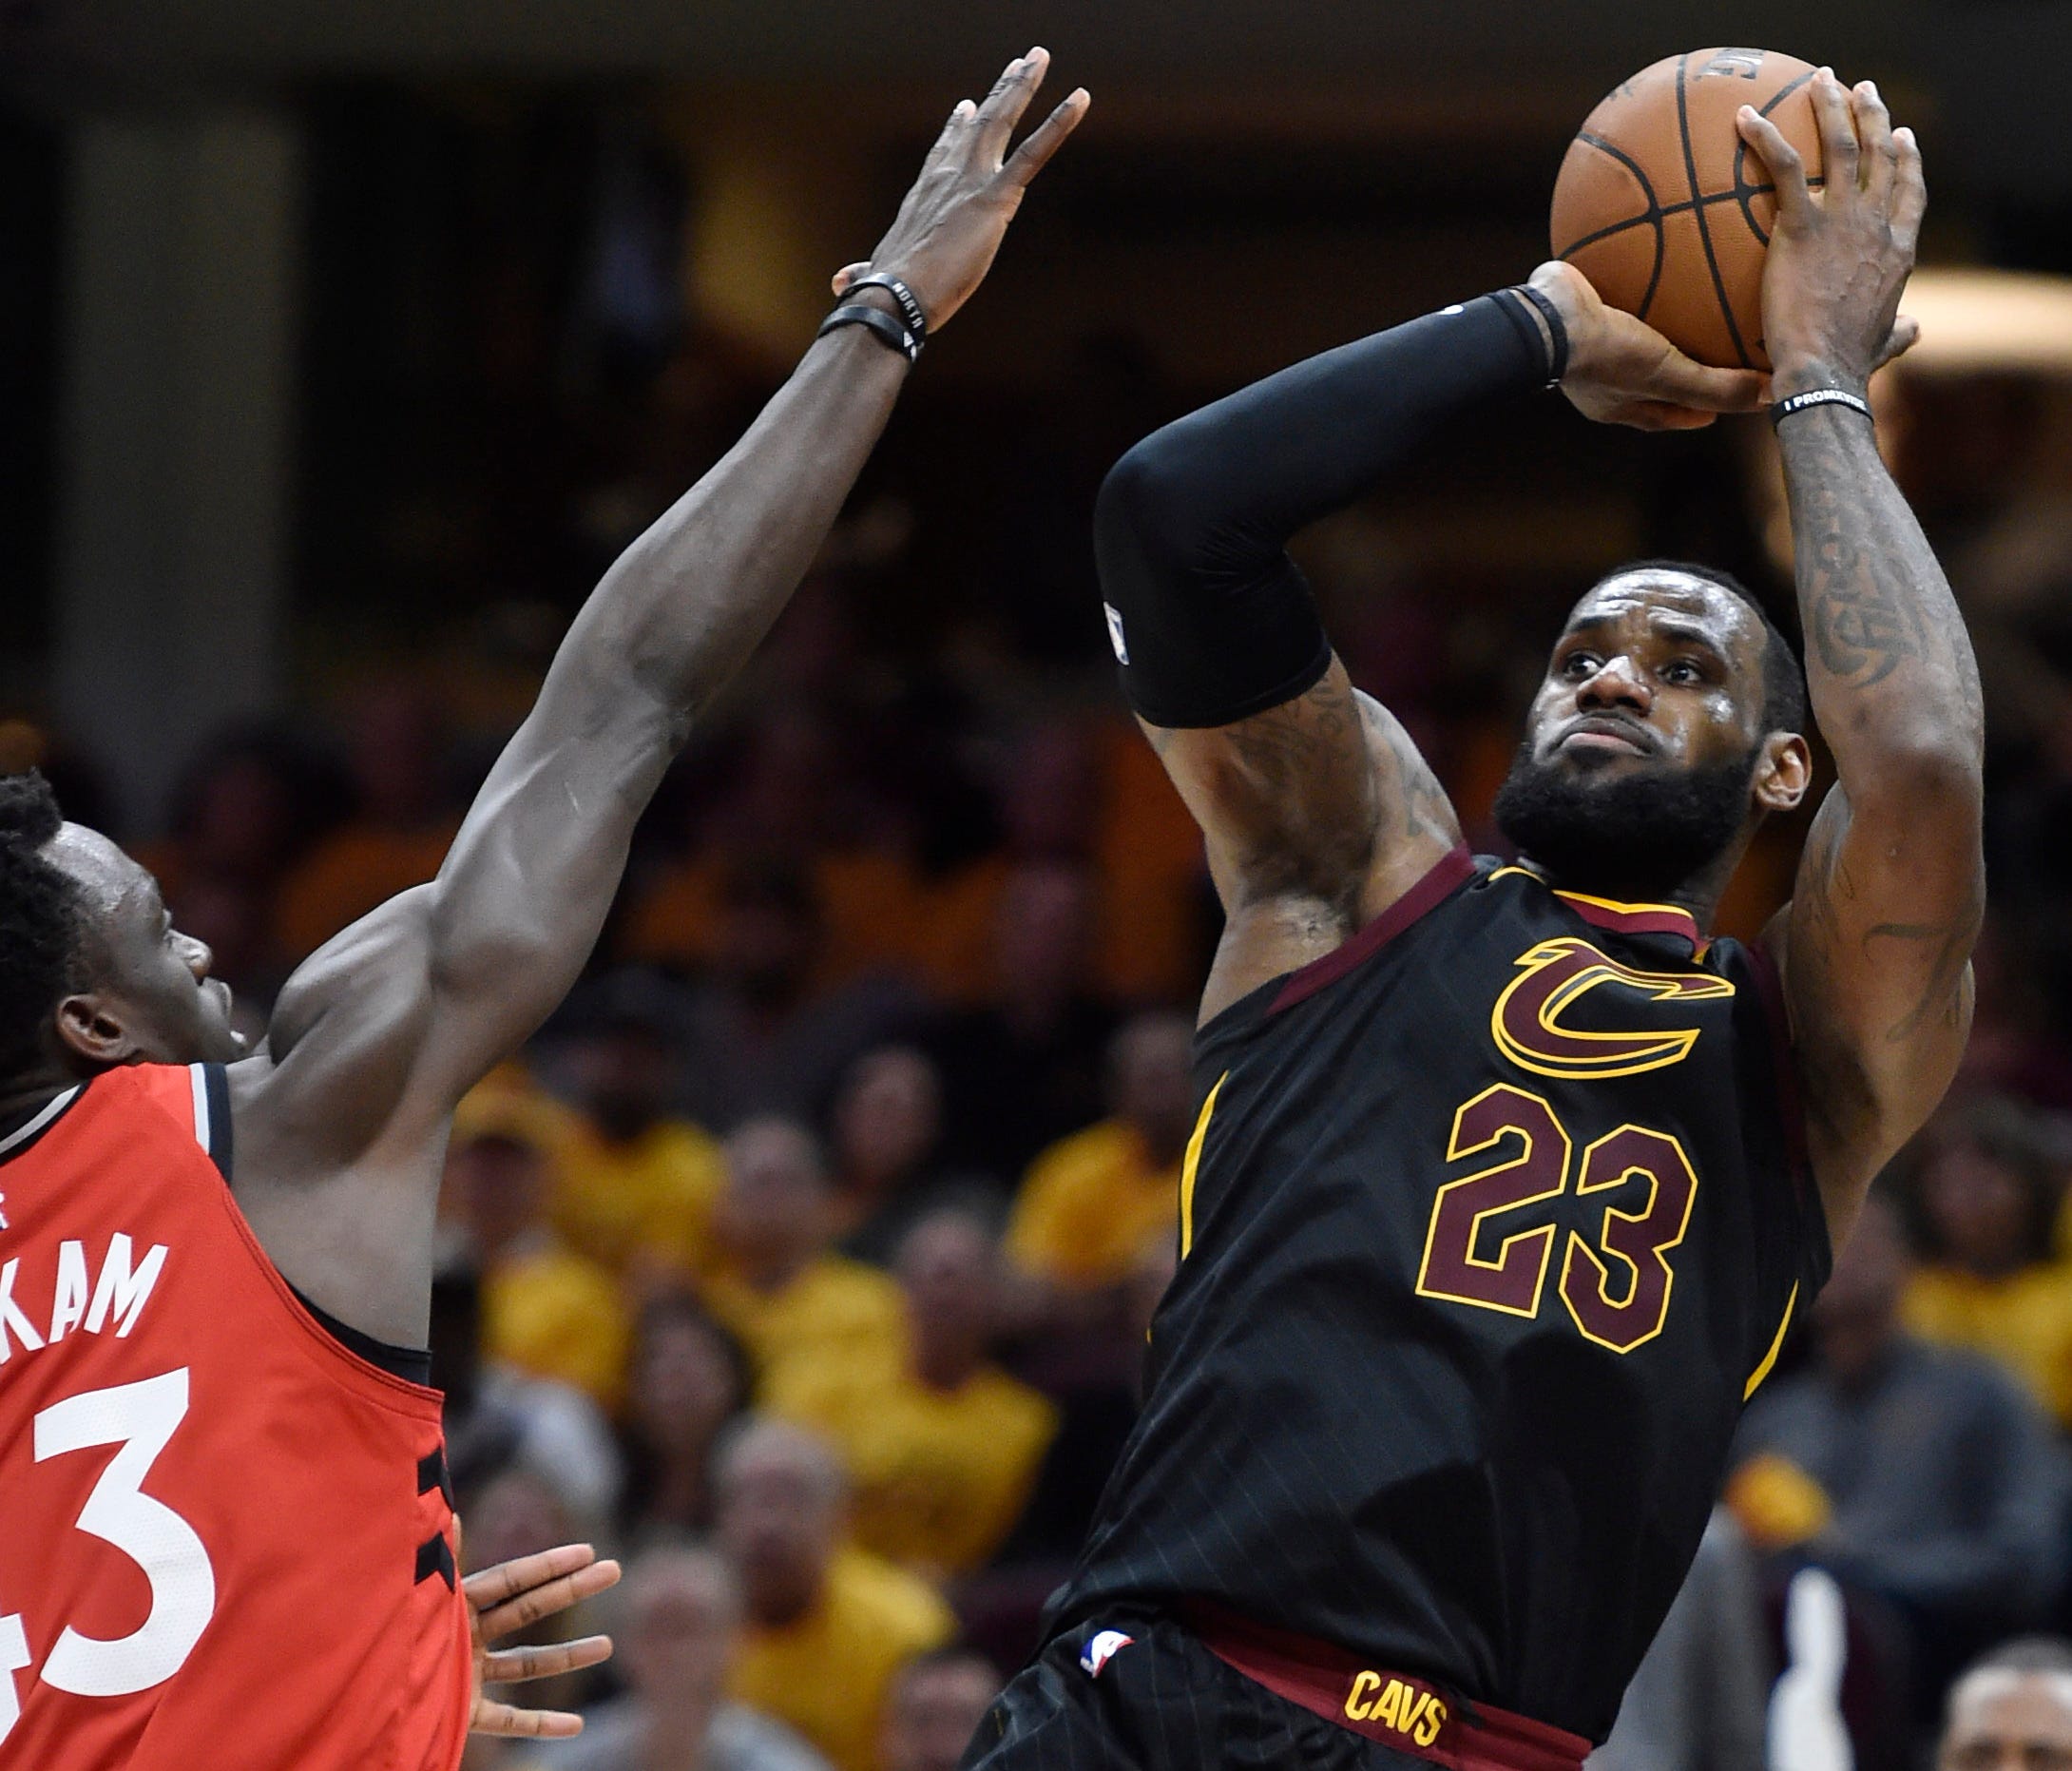 LeBron James makes a fadeaway shot over Raptors forward Pascal Siakam in the NBA playoffs.